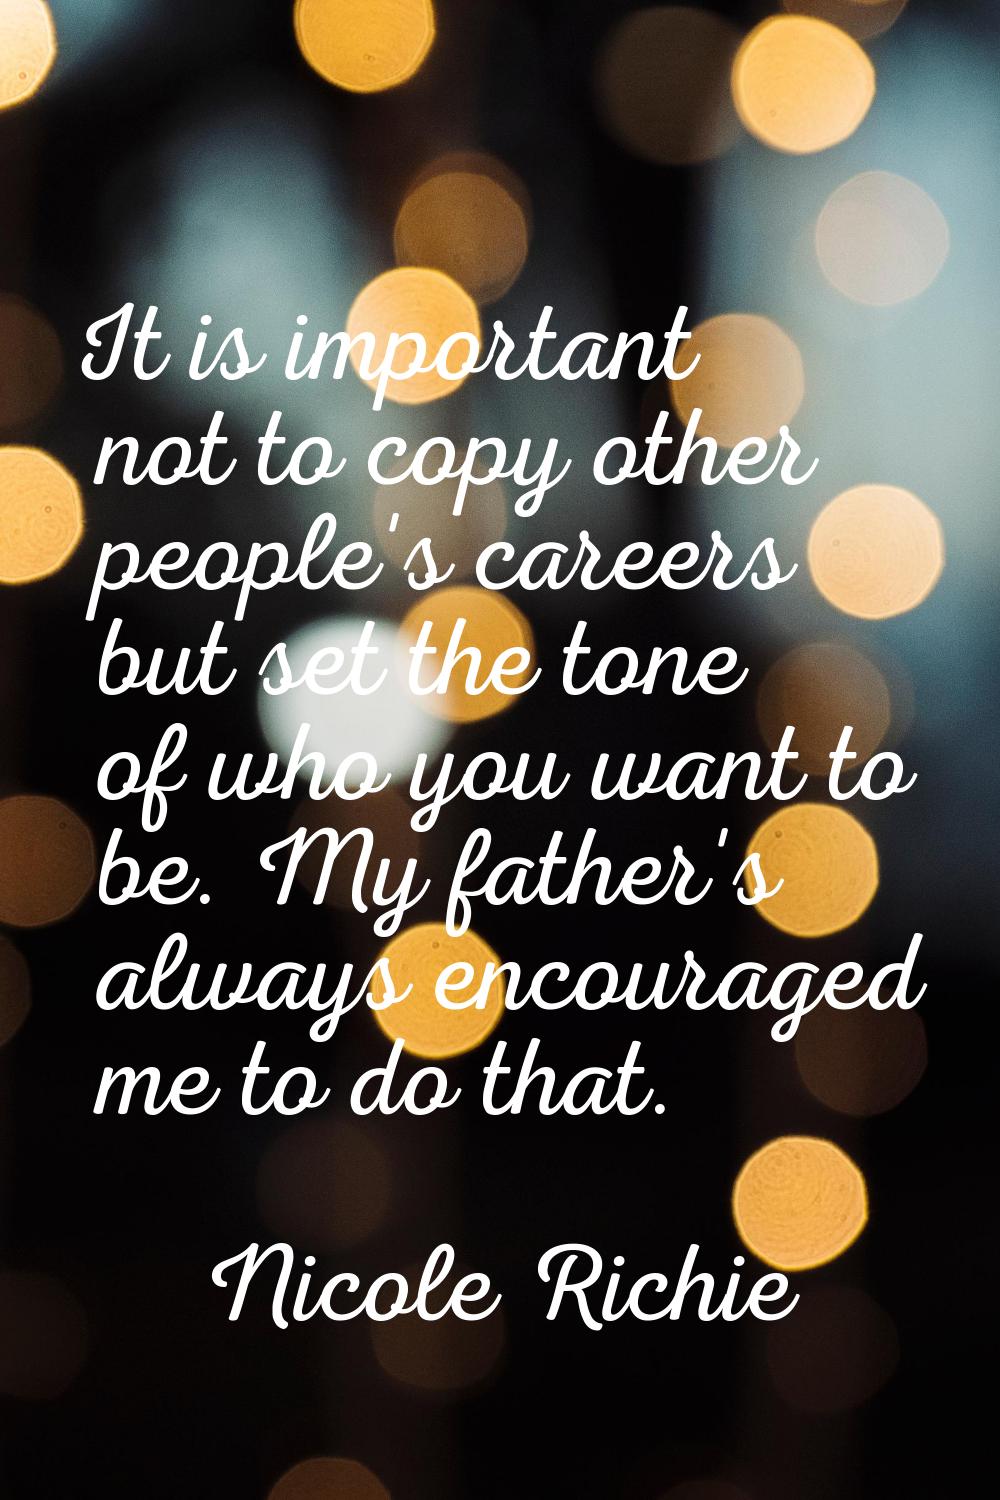 It is important not to copy other people's careers but set the tone of who you want to be. My fathe